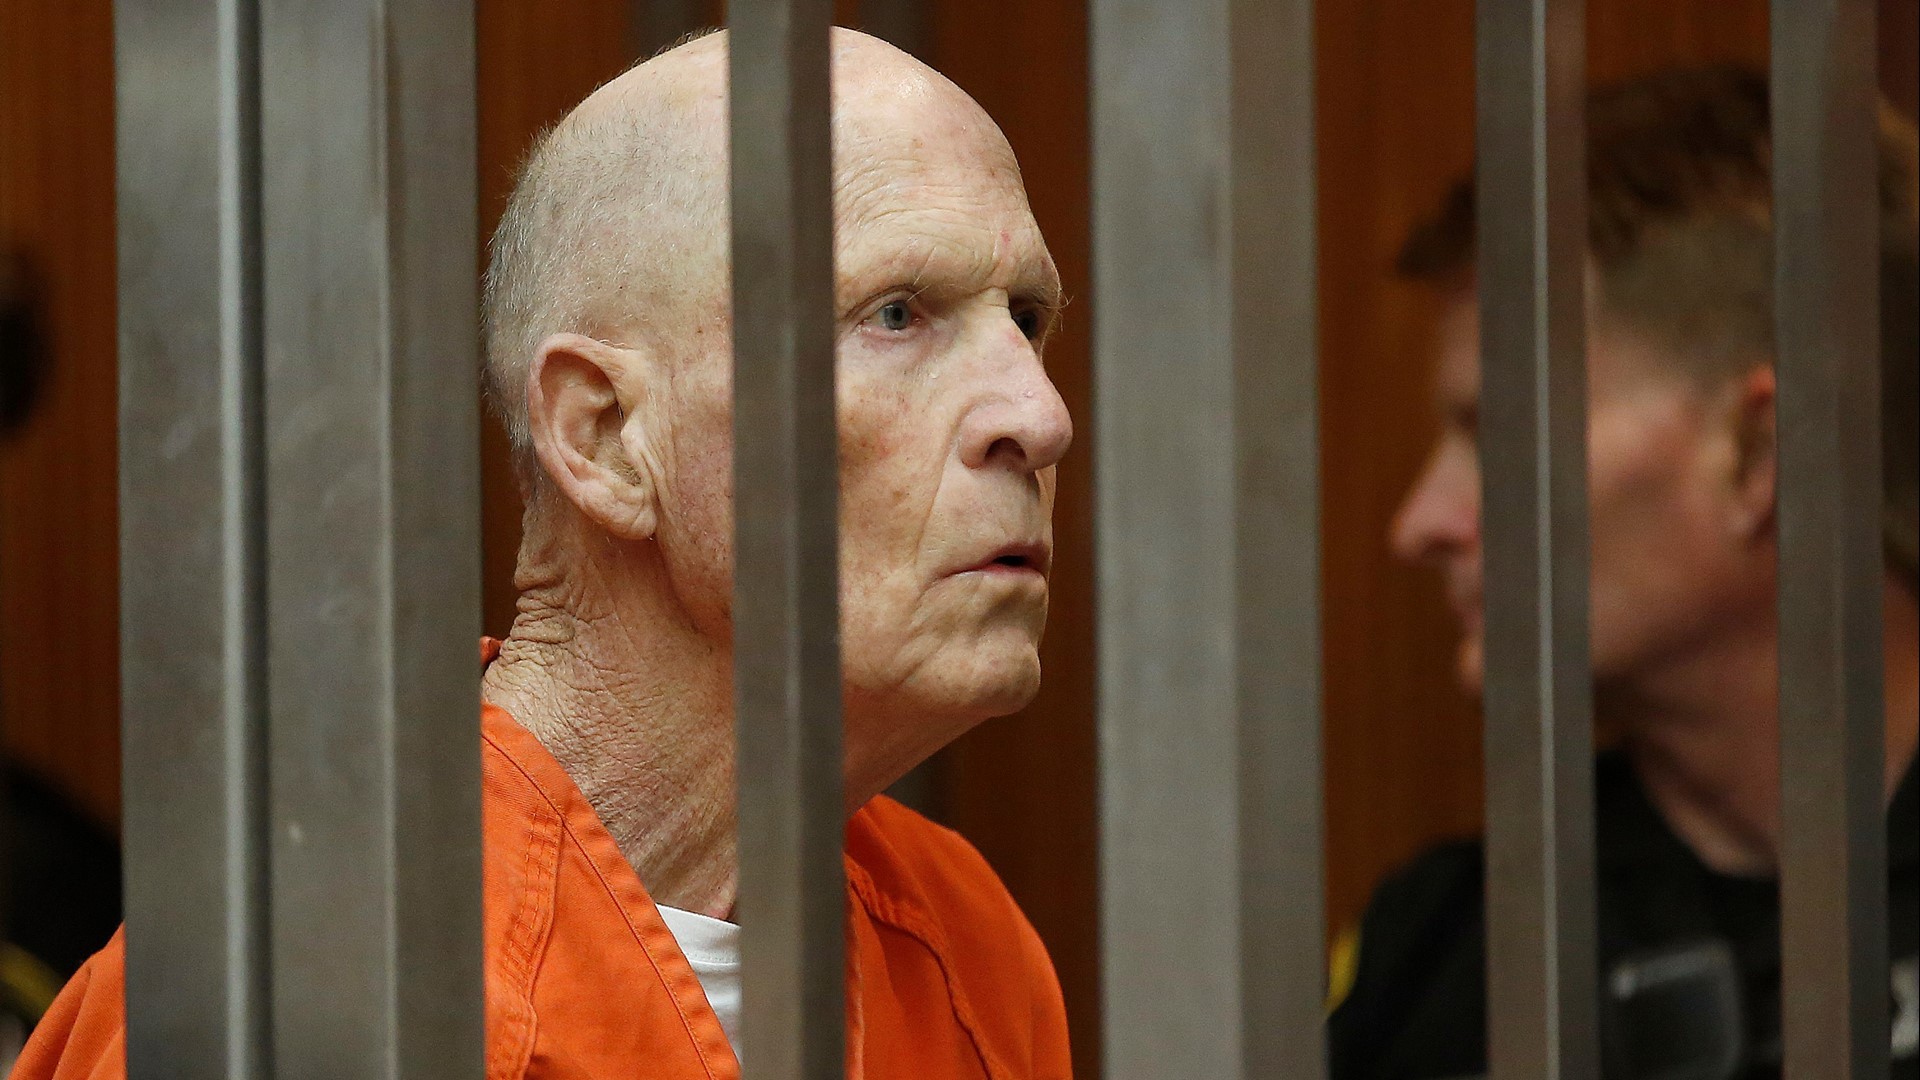 Joseph DeAngelo, a 74-year-old former California police officer, could plead guilty to 13 murders and kidnapping charges in a Sacramento County courtroom this month.